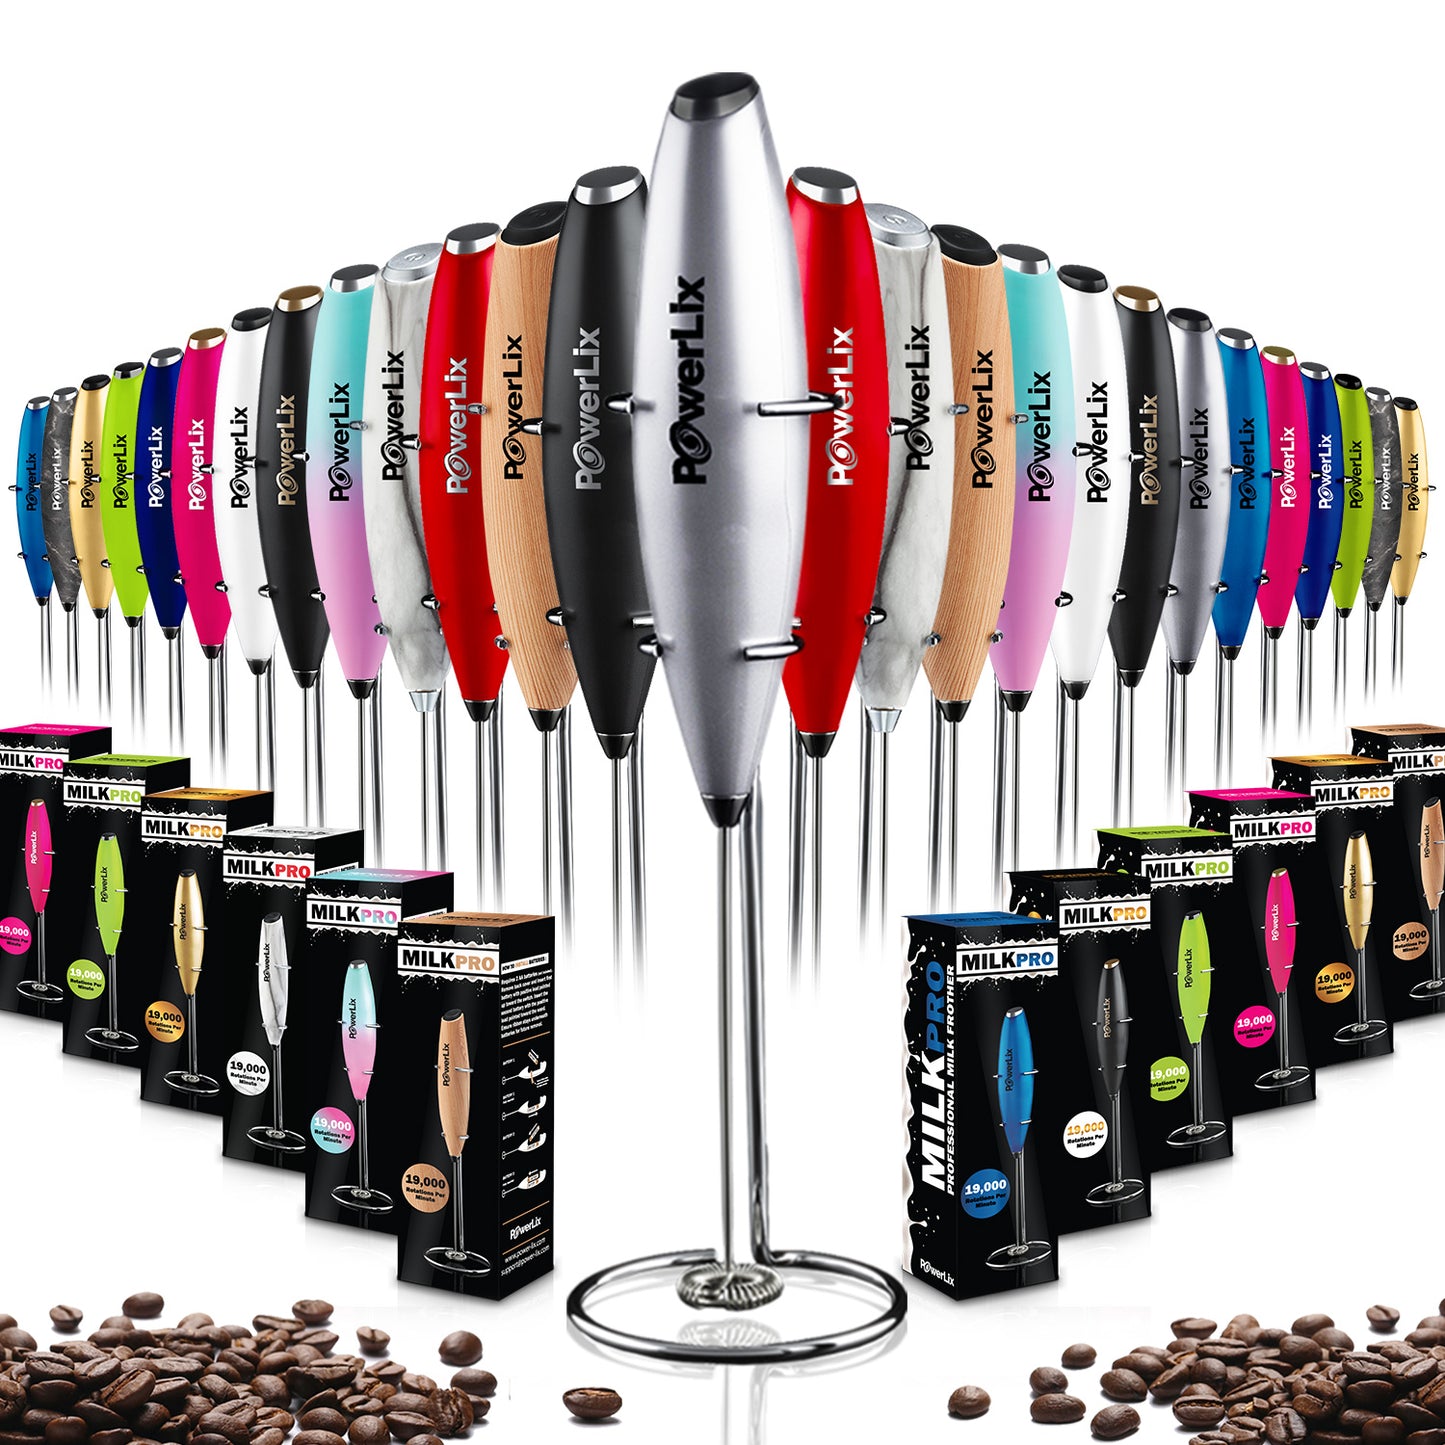 Powerlix milk frother in silver with black text. Other colors and their boxes are displayed.